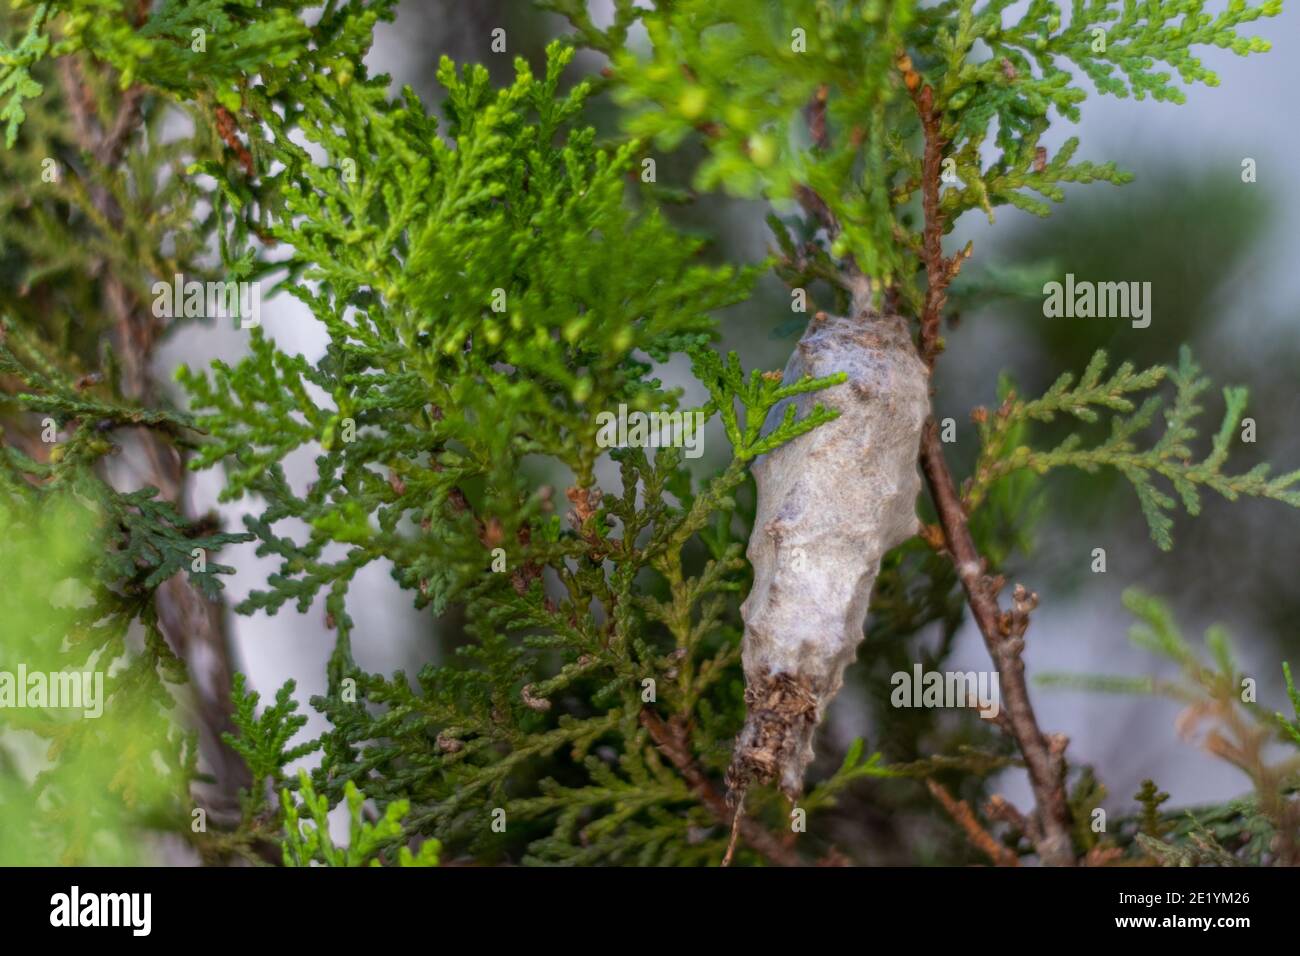 insect cocoon larva hanging from plant Stock Photo